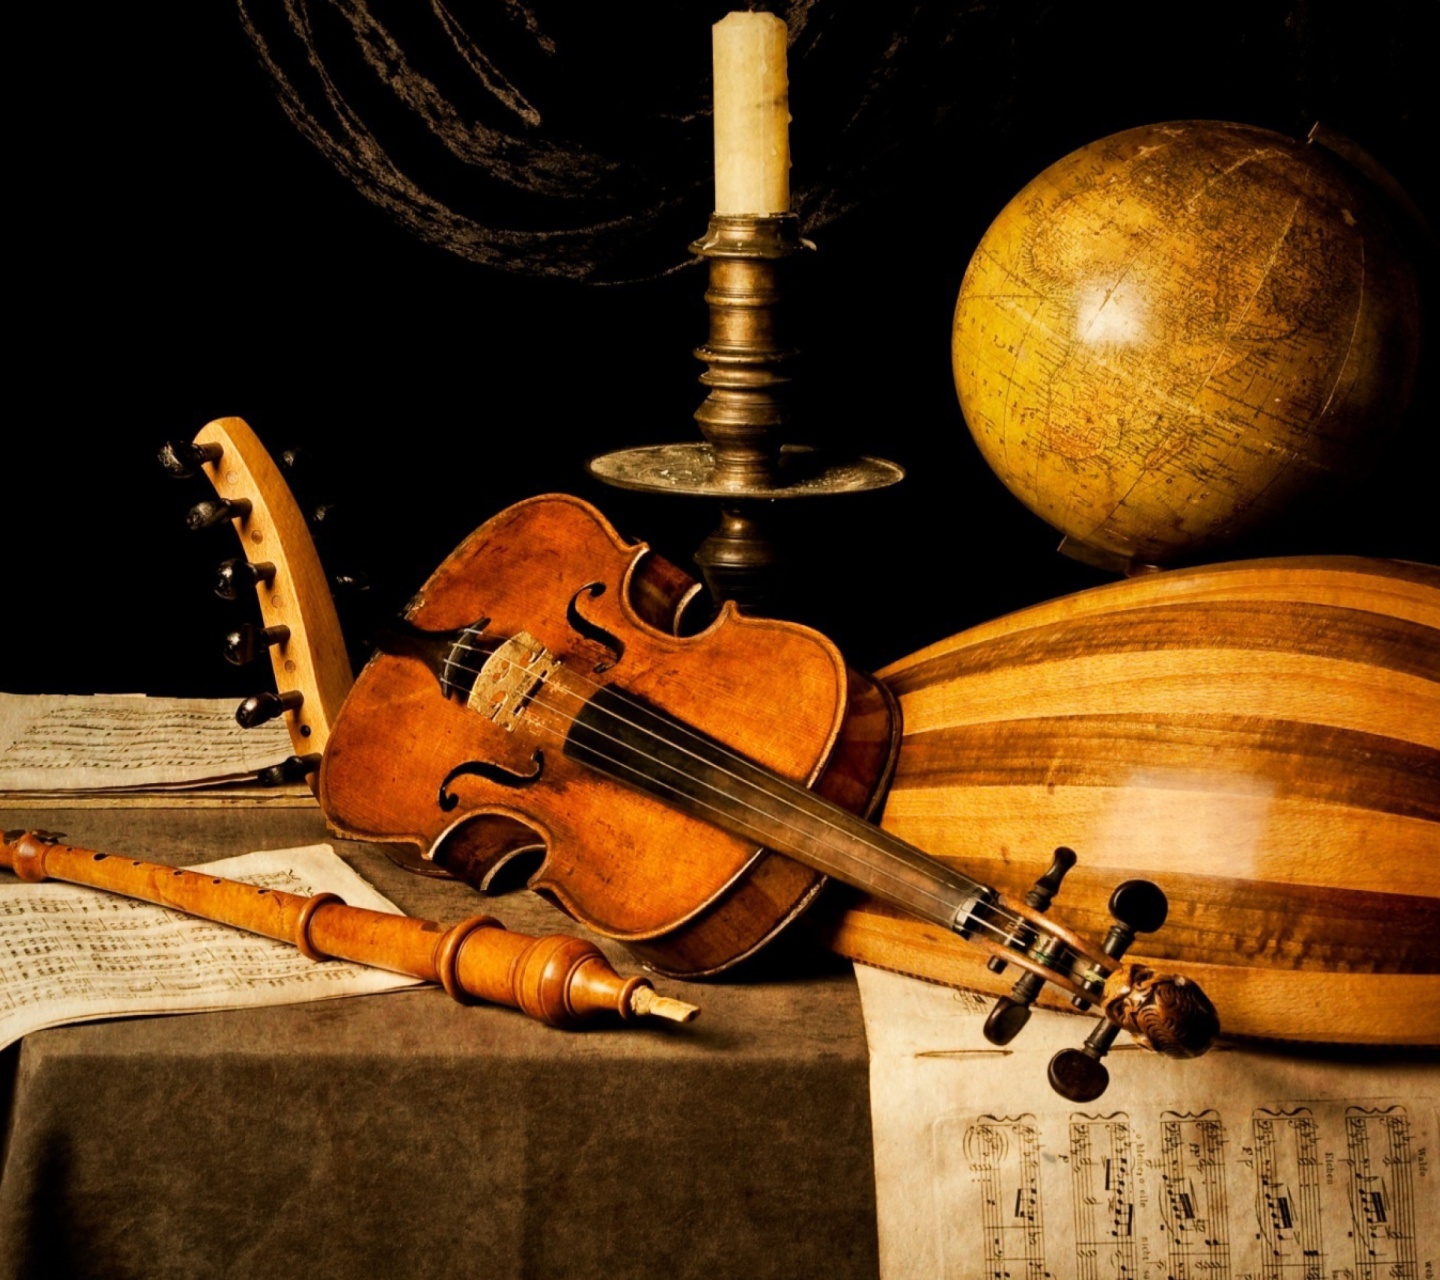 Still life with violin and flute screenshot #1 1440x1280